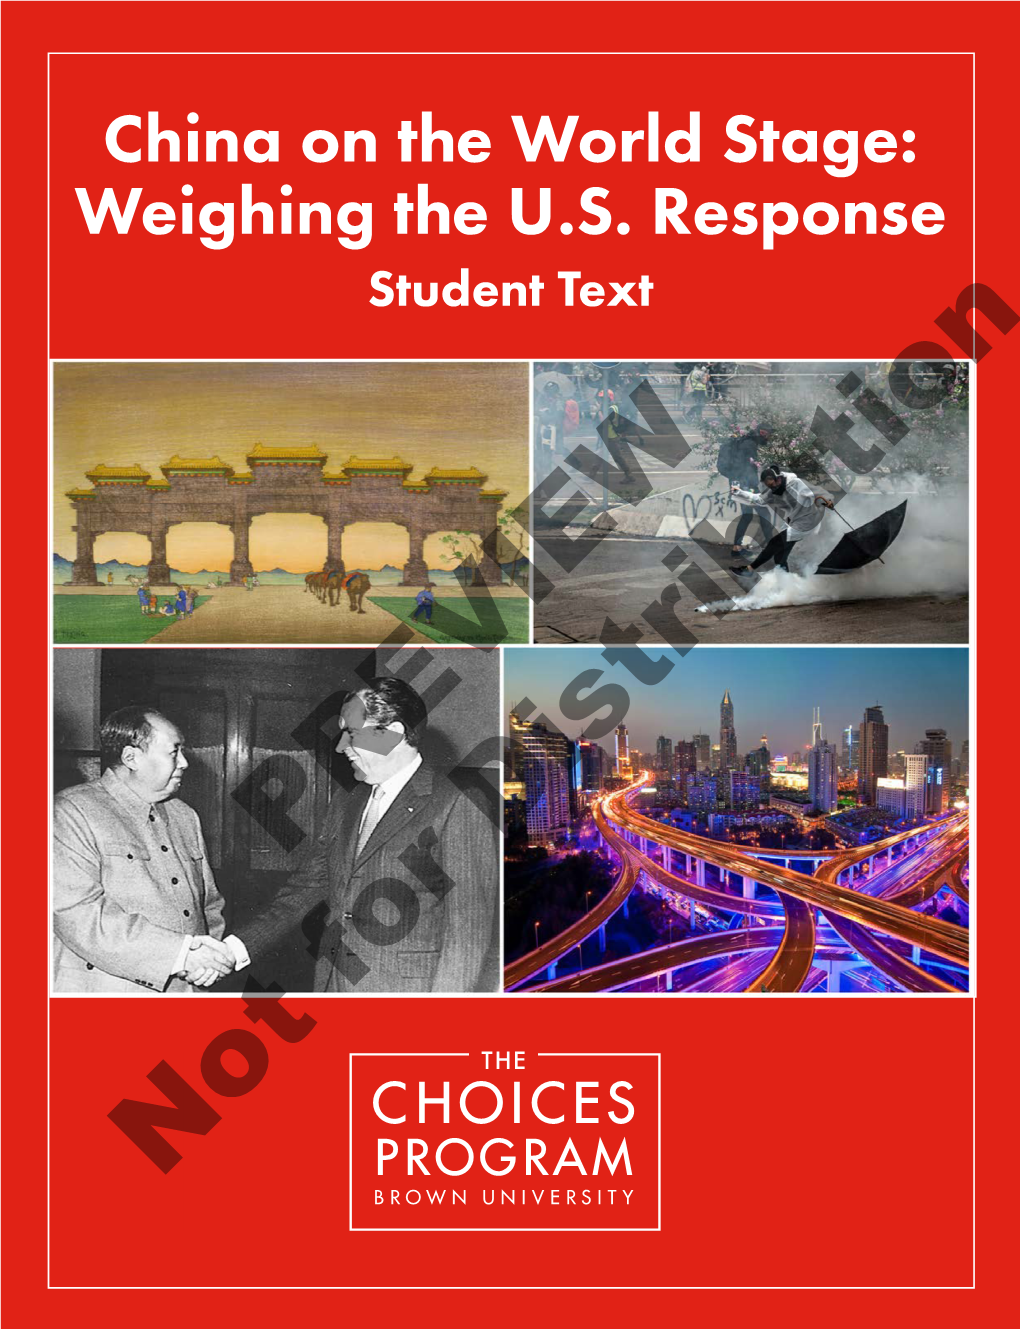 China on the World Stage: Weighing the U.S. Response Student Text